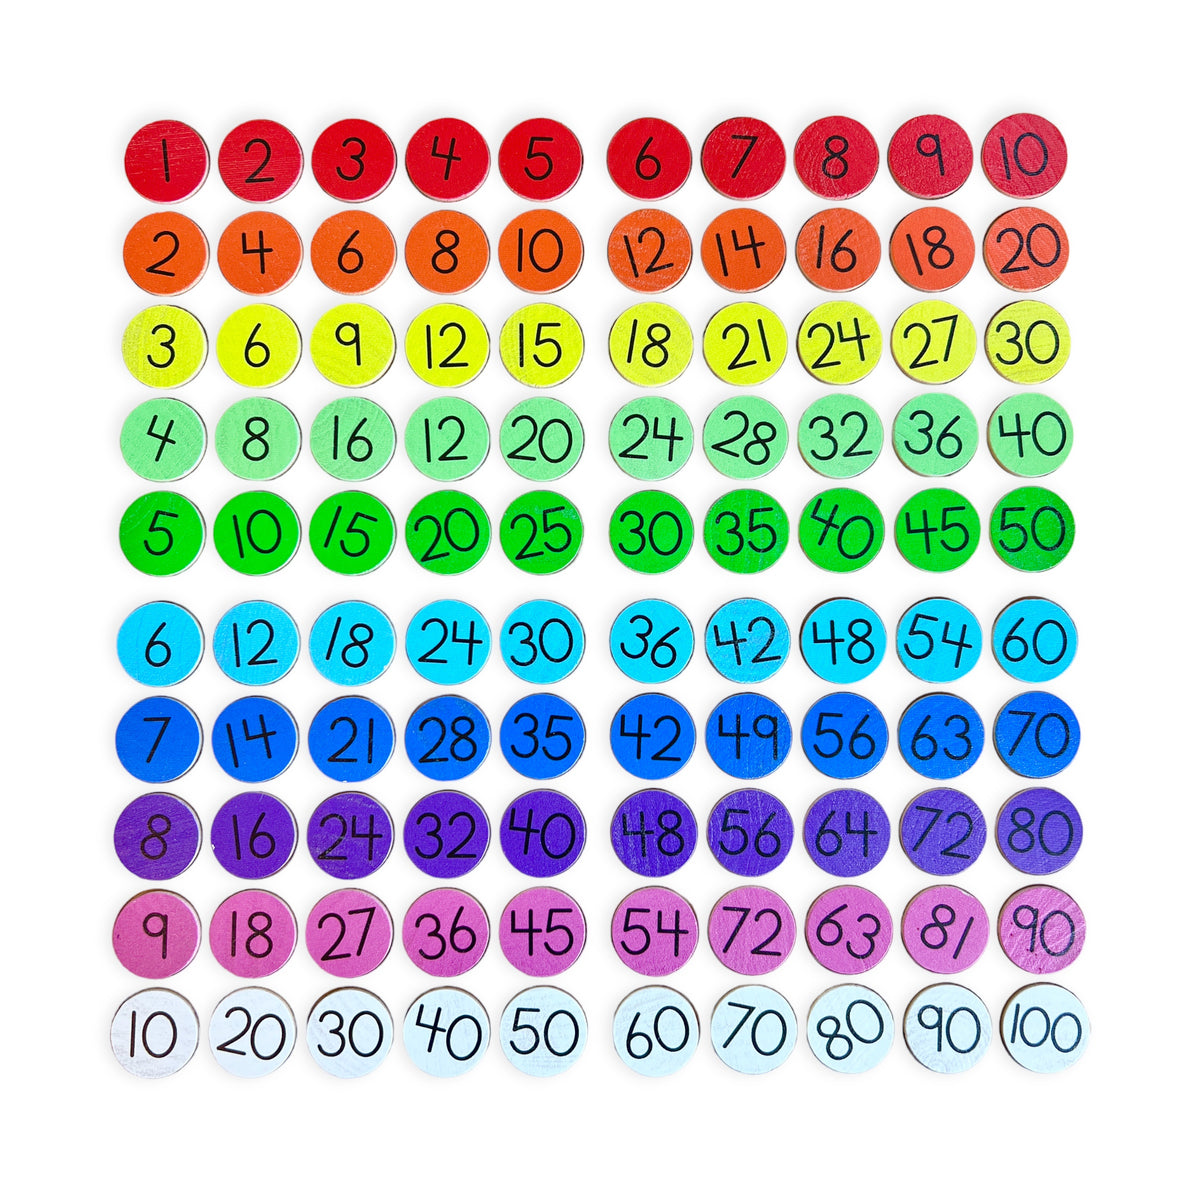 Small Coins - Multiplication Table 10x10 Set